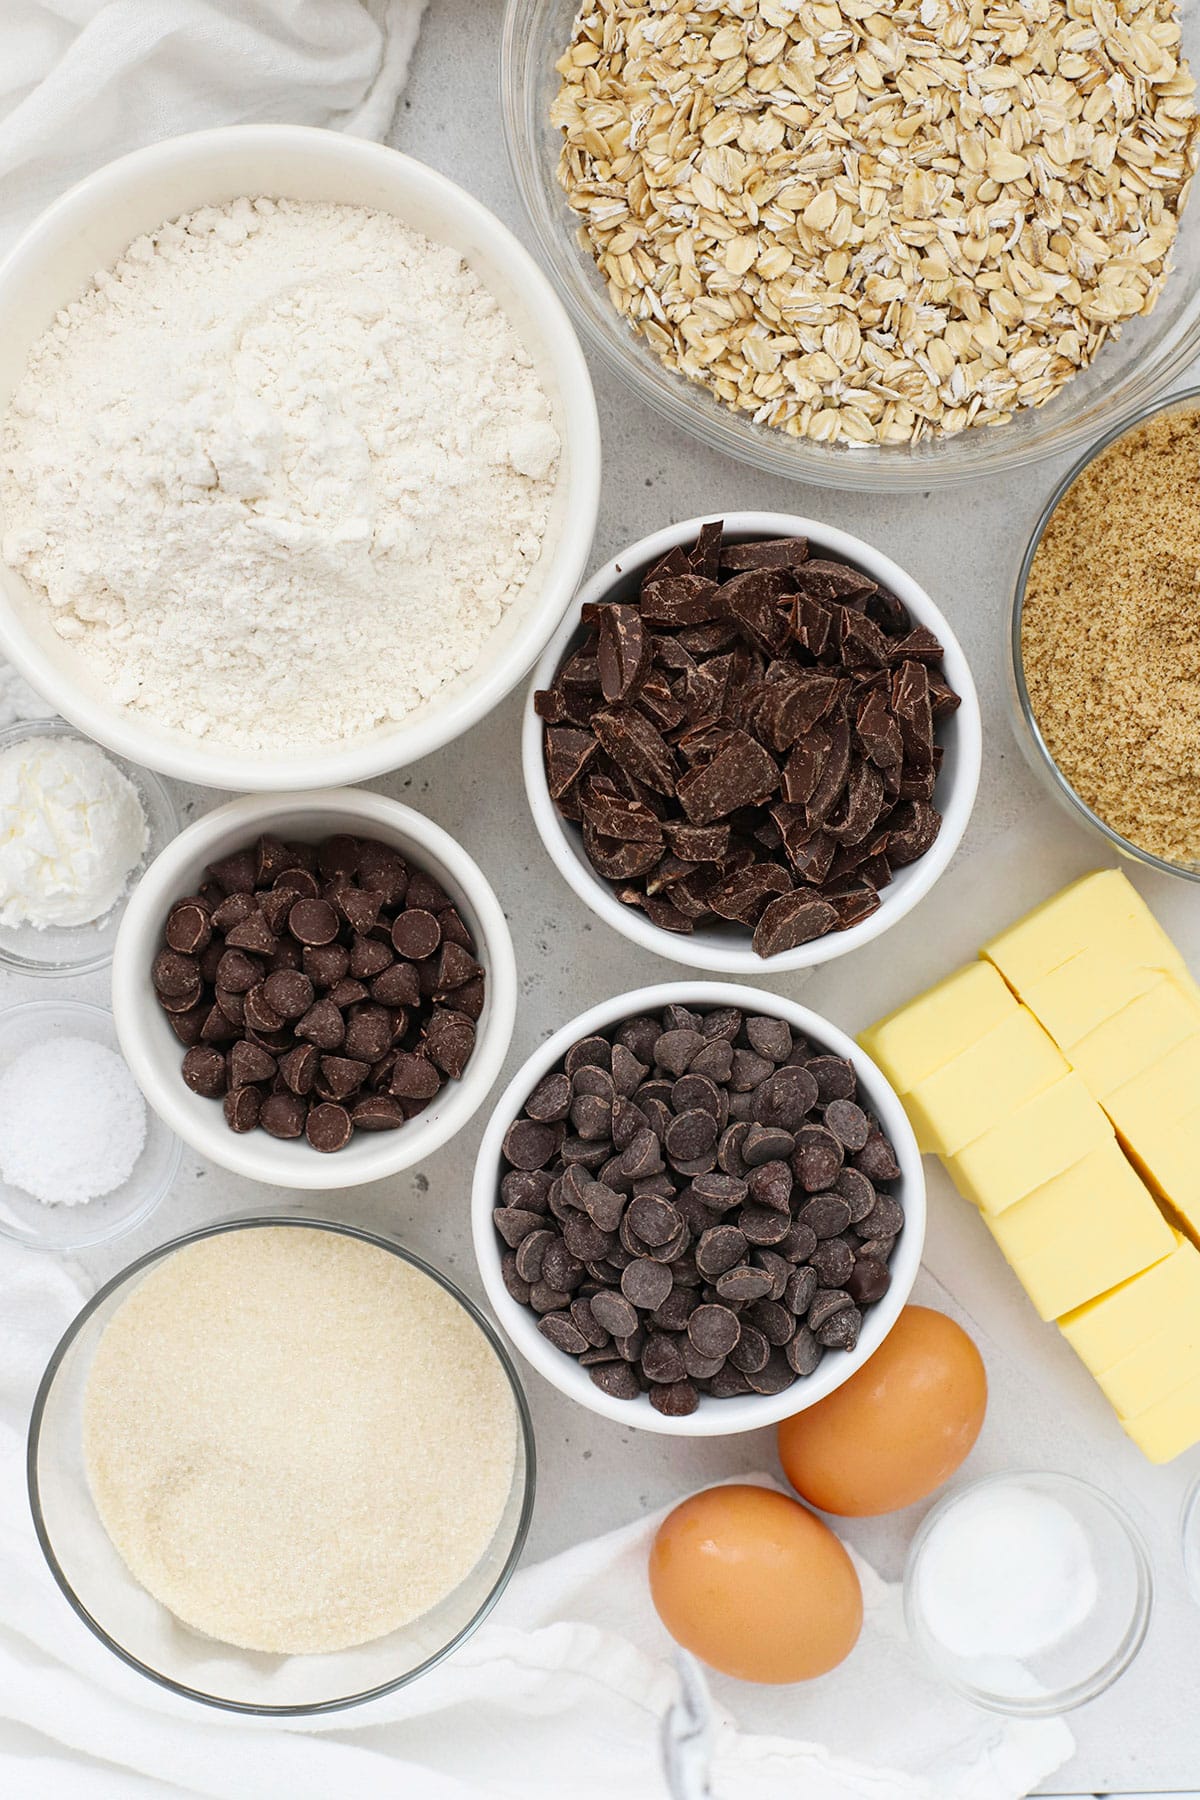 Ingredients for gluten-free oatmeal chocolate chip cookies in small white bowls